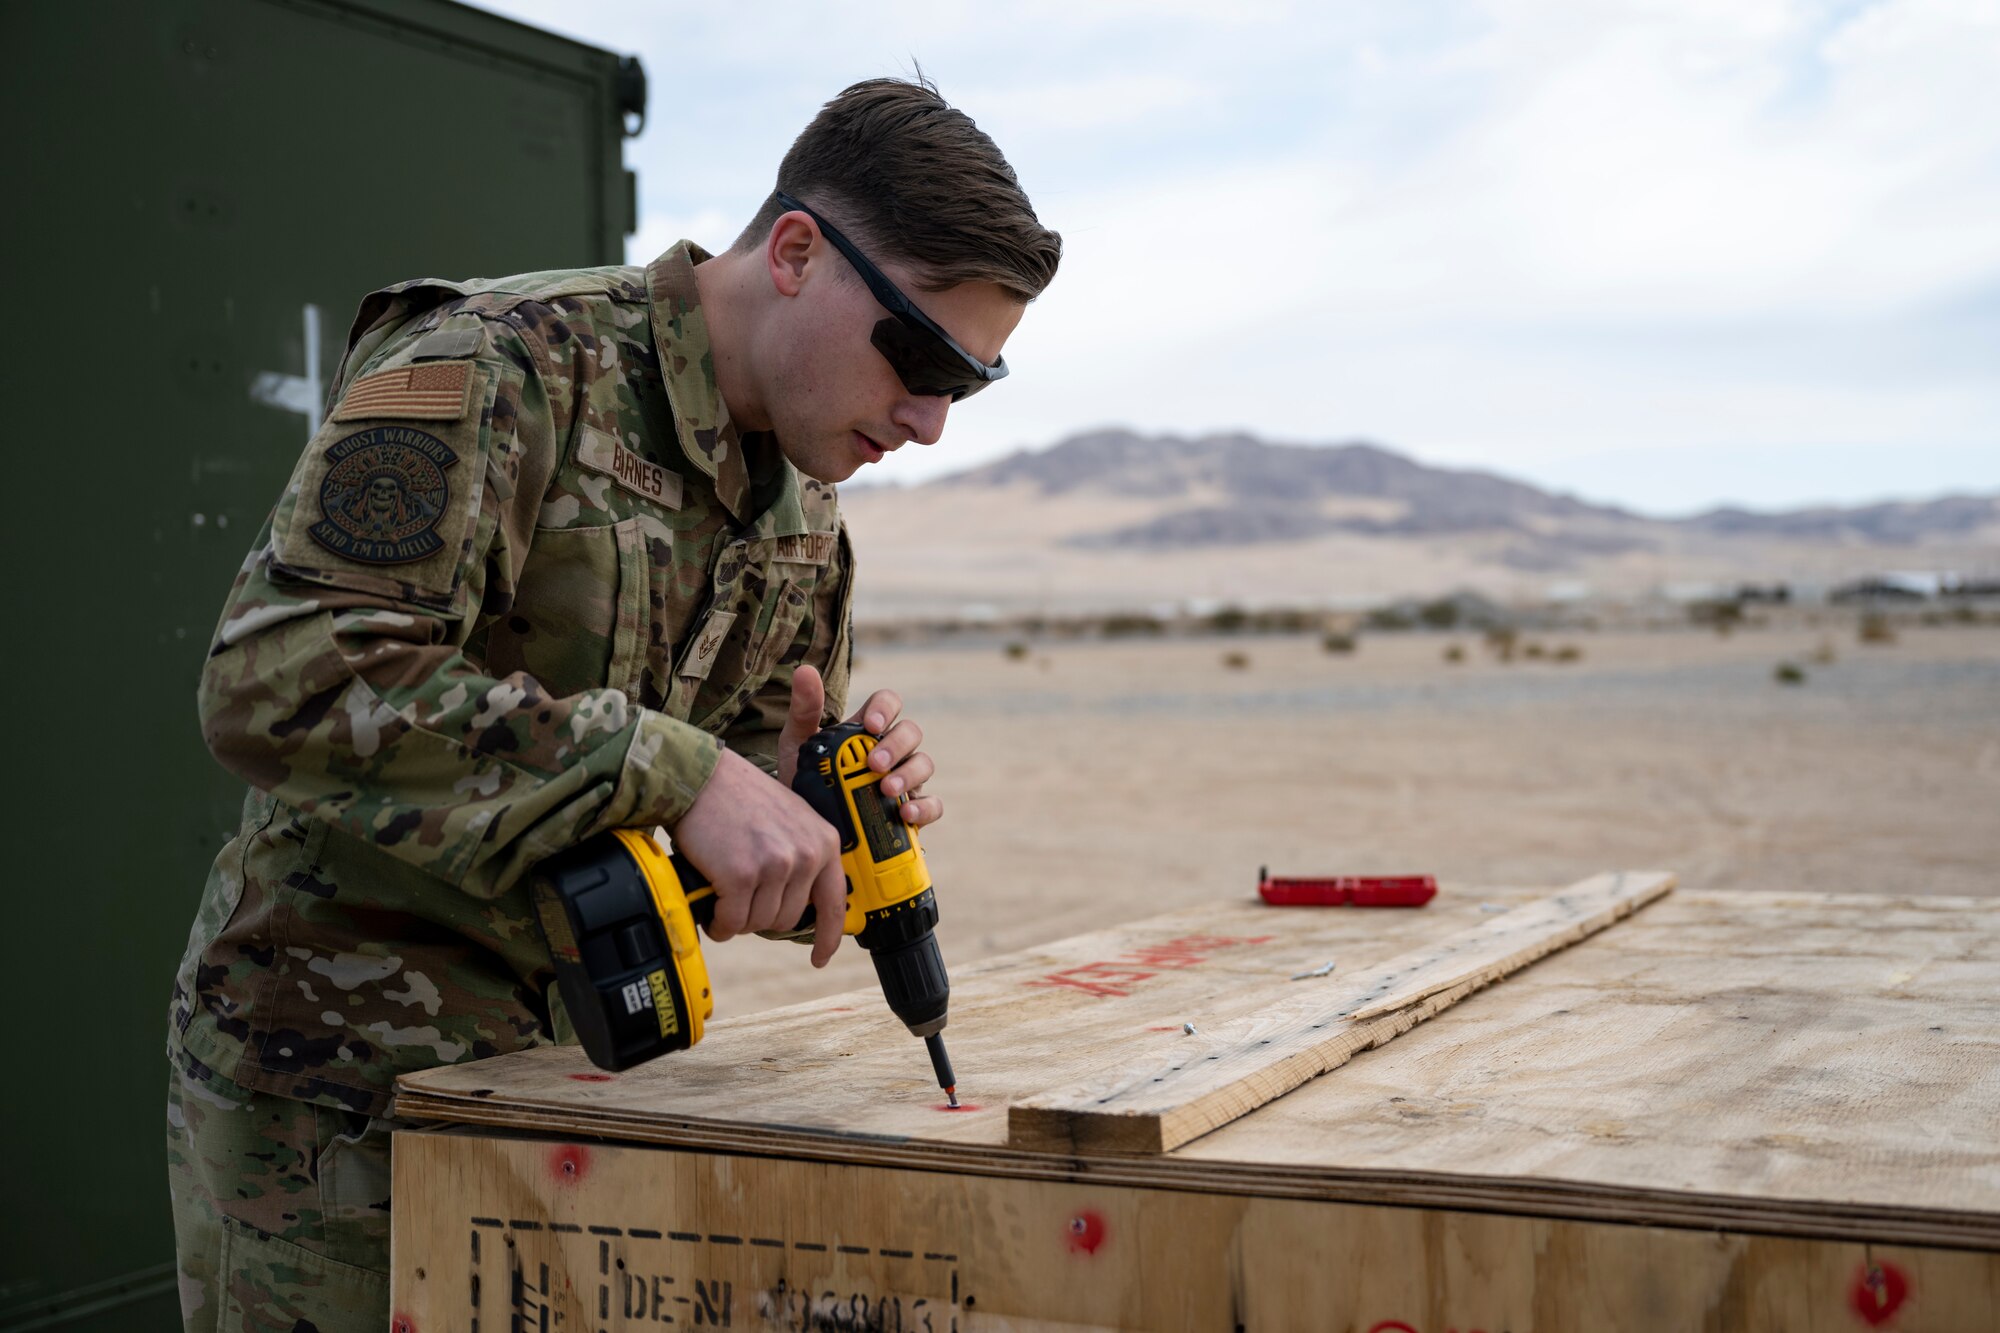 U.S. Air Force Staff Sgt. Camden Barnes, 29th Aircraft Maintenance Squadron avionics system technician, unboxes a TowFLEXX TF3 aircraft tug at Marine Corps Air Ground Combat Command Center, Twentynine Palms, California, Feb. 13, 2023. Airmen from Holloman Air Force Base, Cannon AFB, N.M., and Creech AFB, Nevada, participated in Agile Combat Employment Reaper 23.6 at Twentynine Palms to hone their skills while also supporting RPA training for Marines stationed there. (U.S. Air Force photo by Staff Sgt. Kristin West)